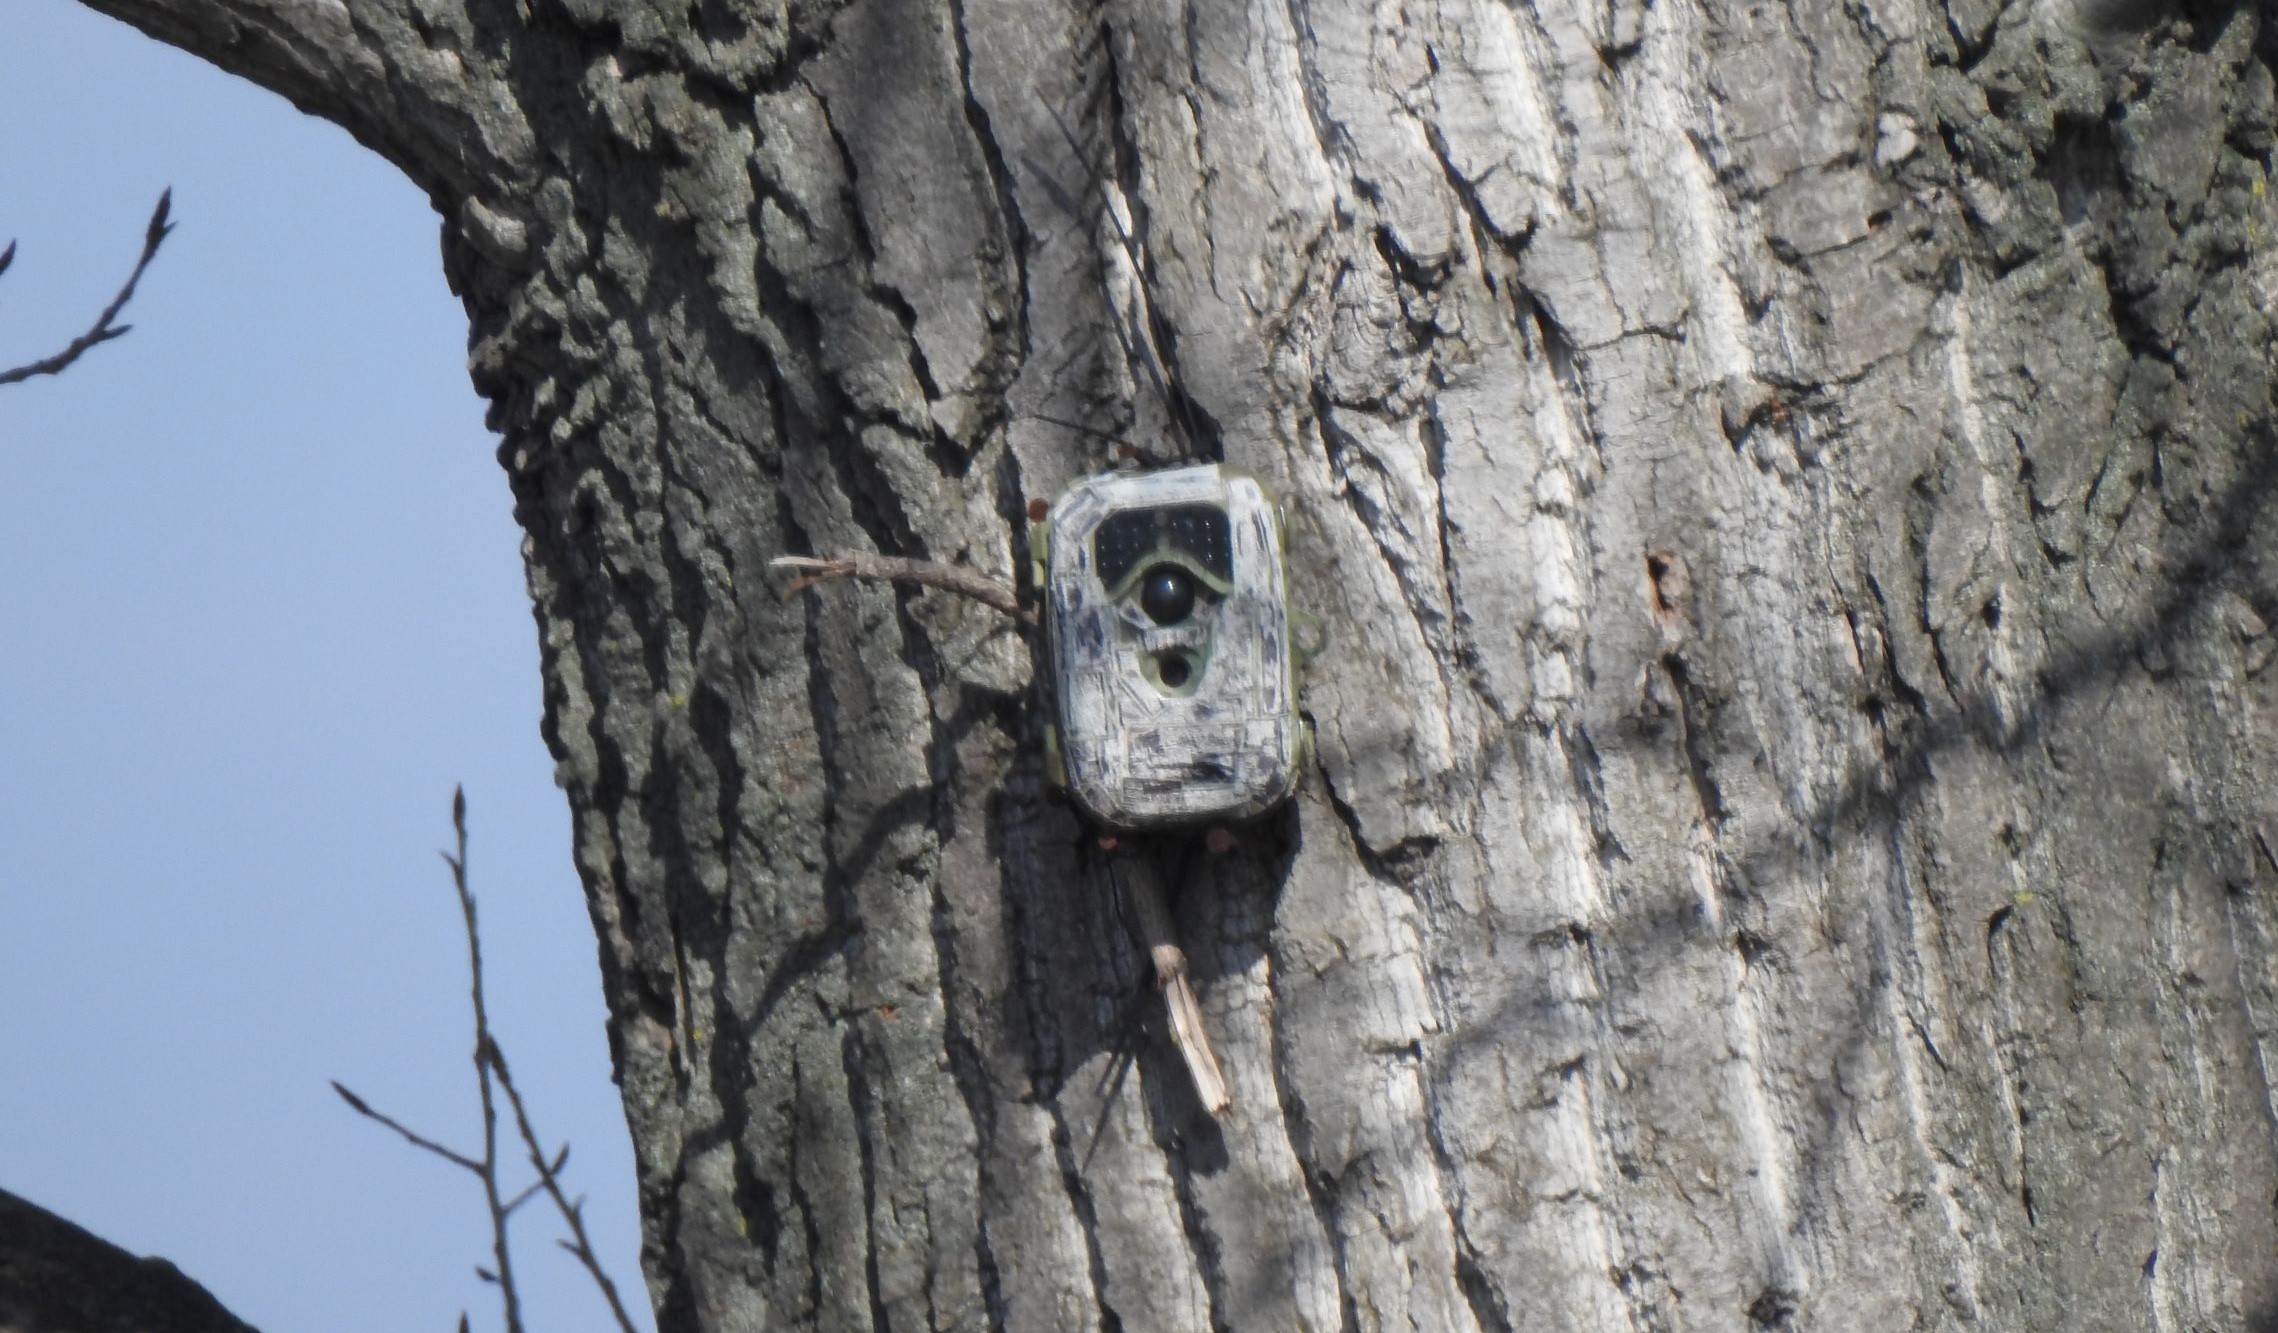 Illustration image of the Monitoring project actions - photo trap installed on the tree to monitor the birds nearby